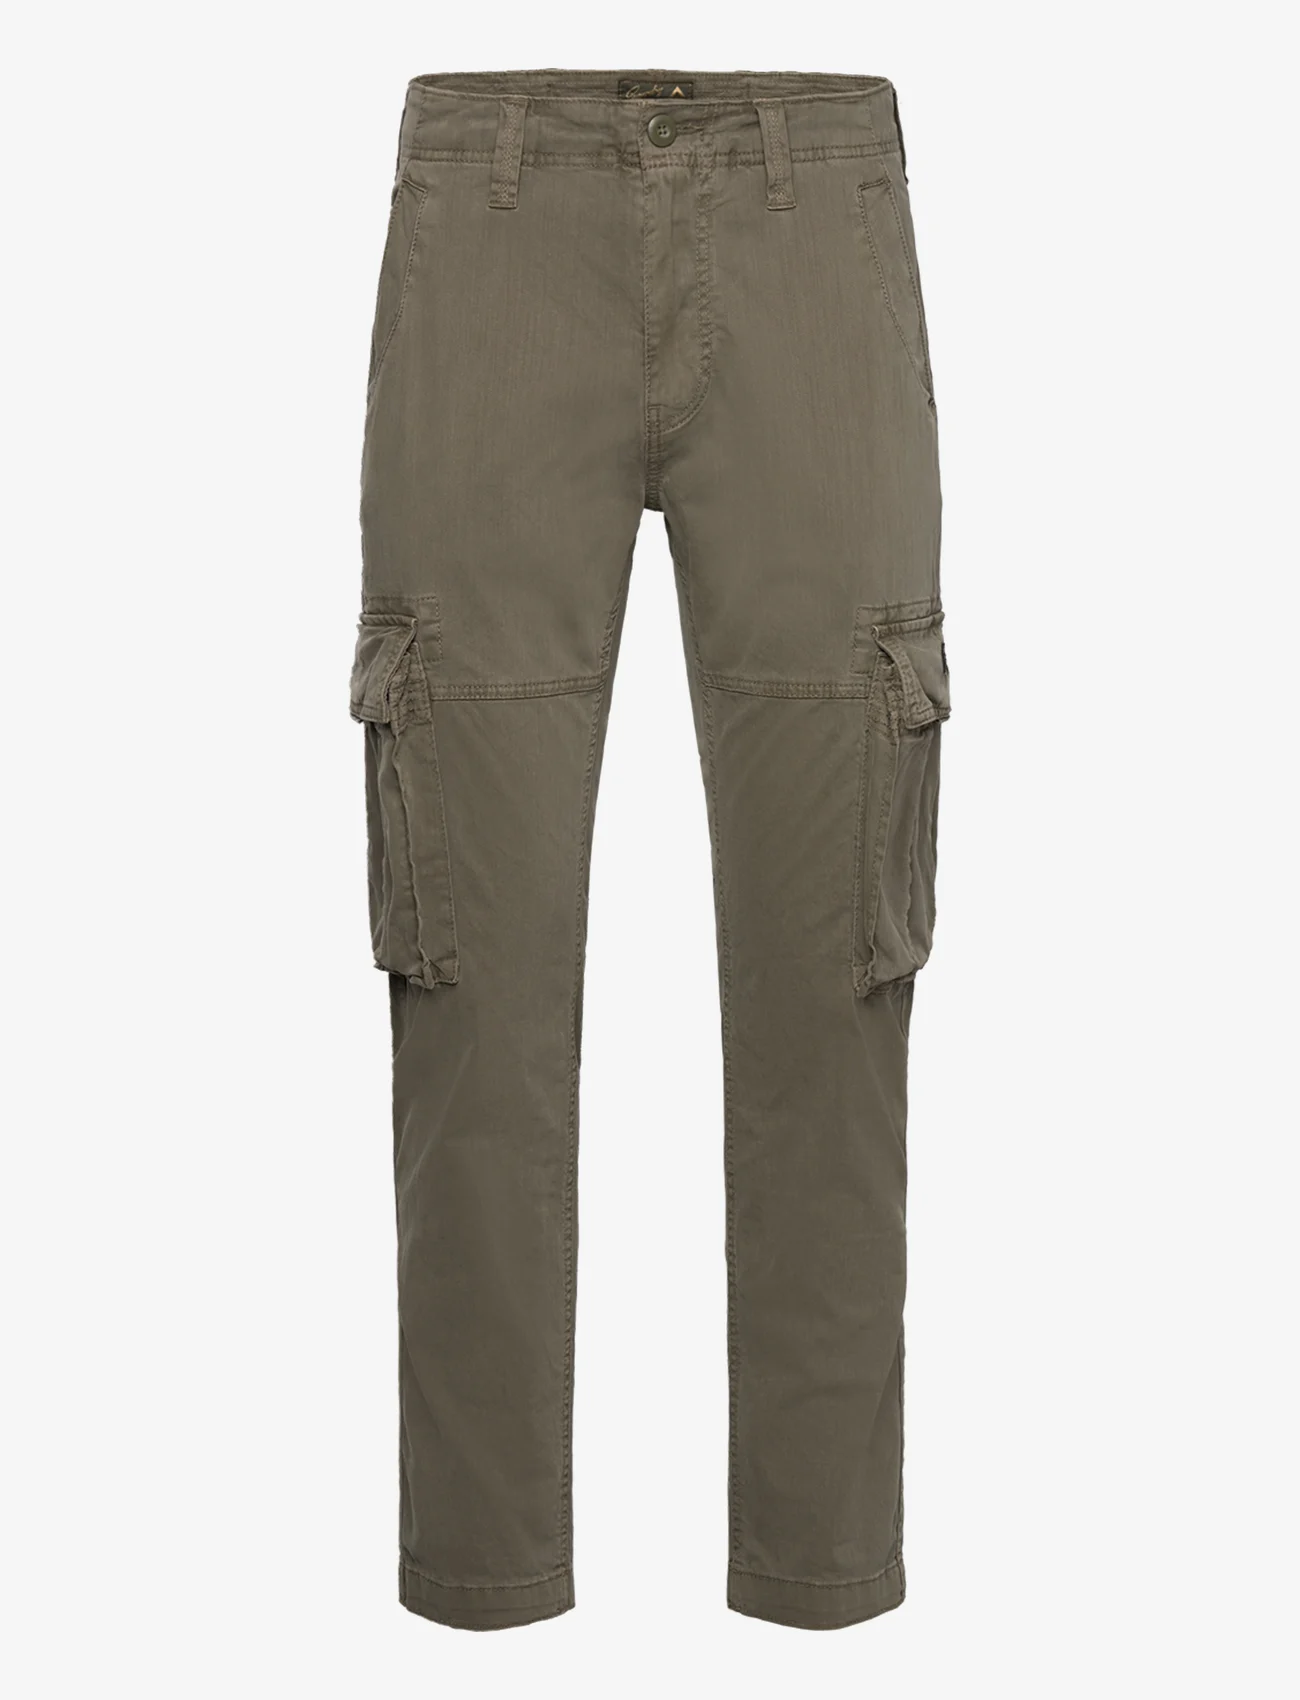 Superdry - CORE CARGO PANT - cargo pants - chive green - 0